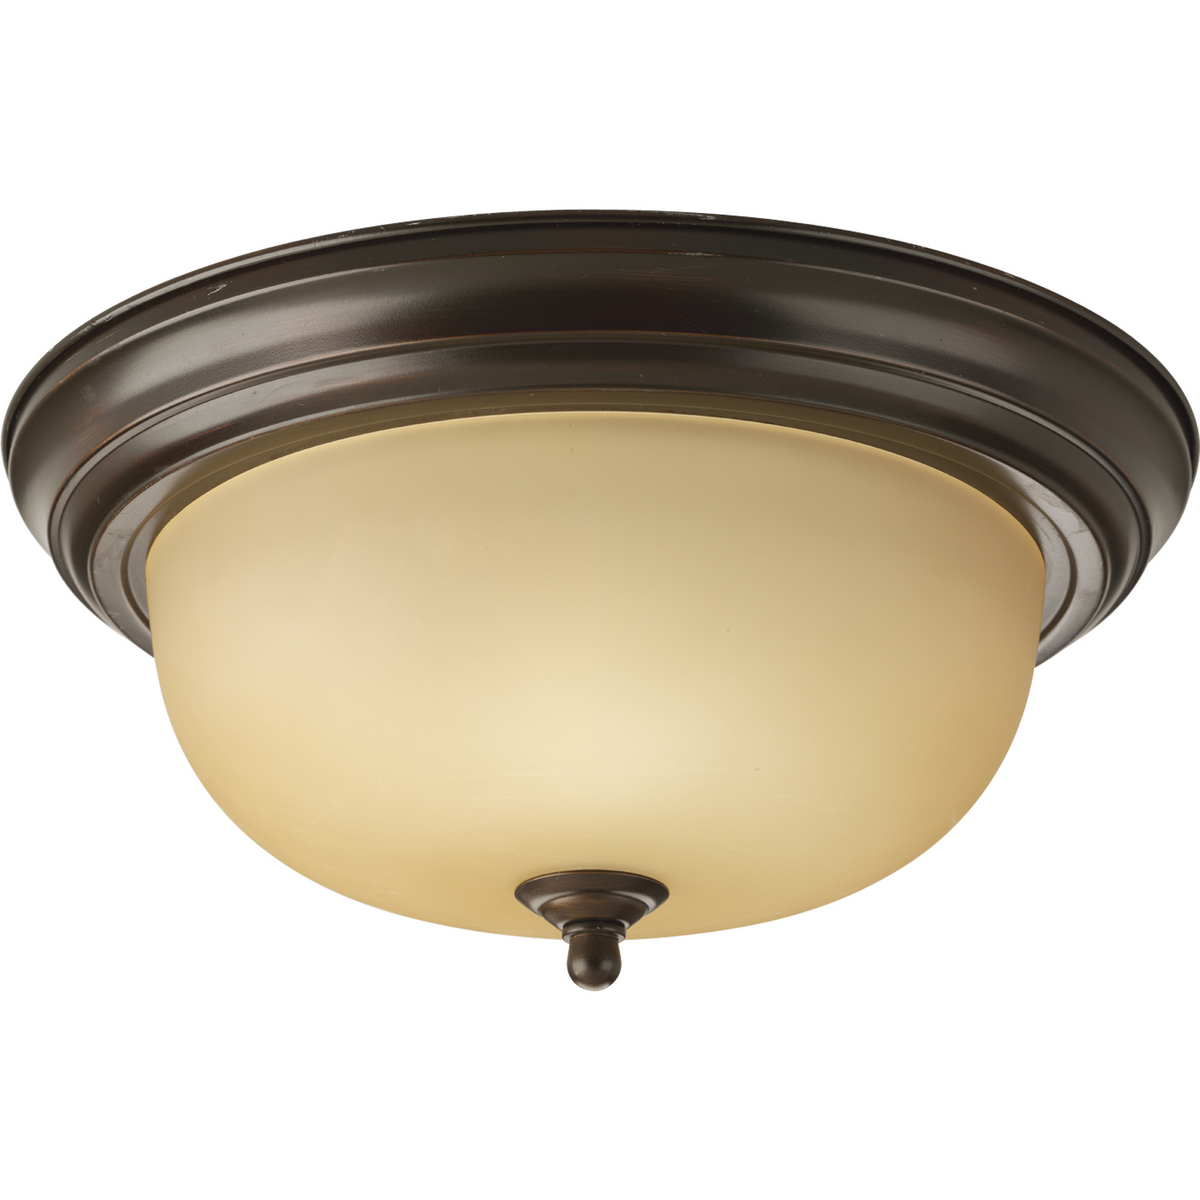 Two-light flush mount with dome shaped etched light topaz glass, solid trim and decorative knobs. Center lock-up with matching finial.